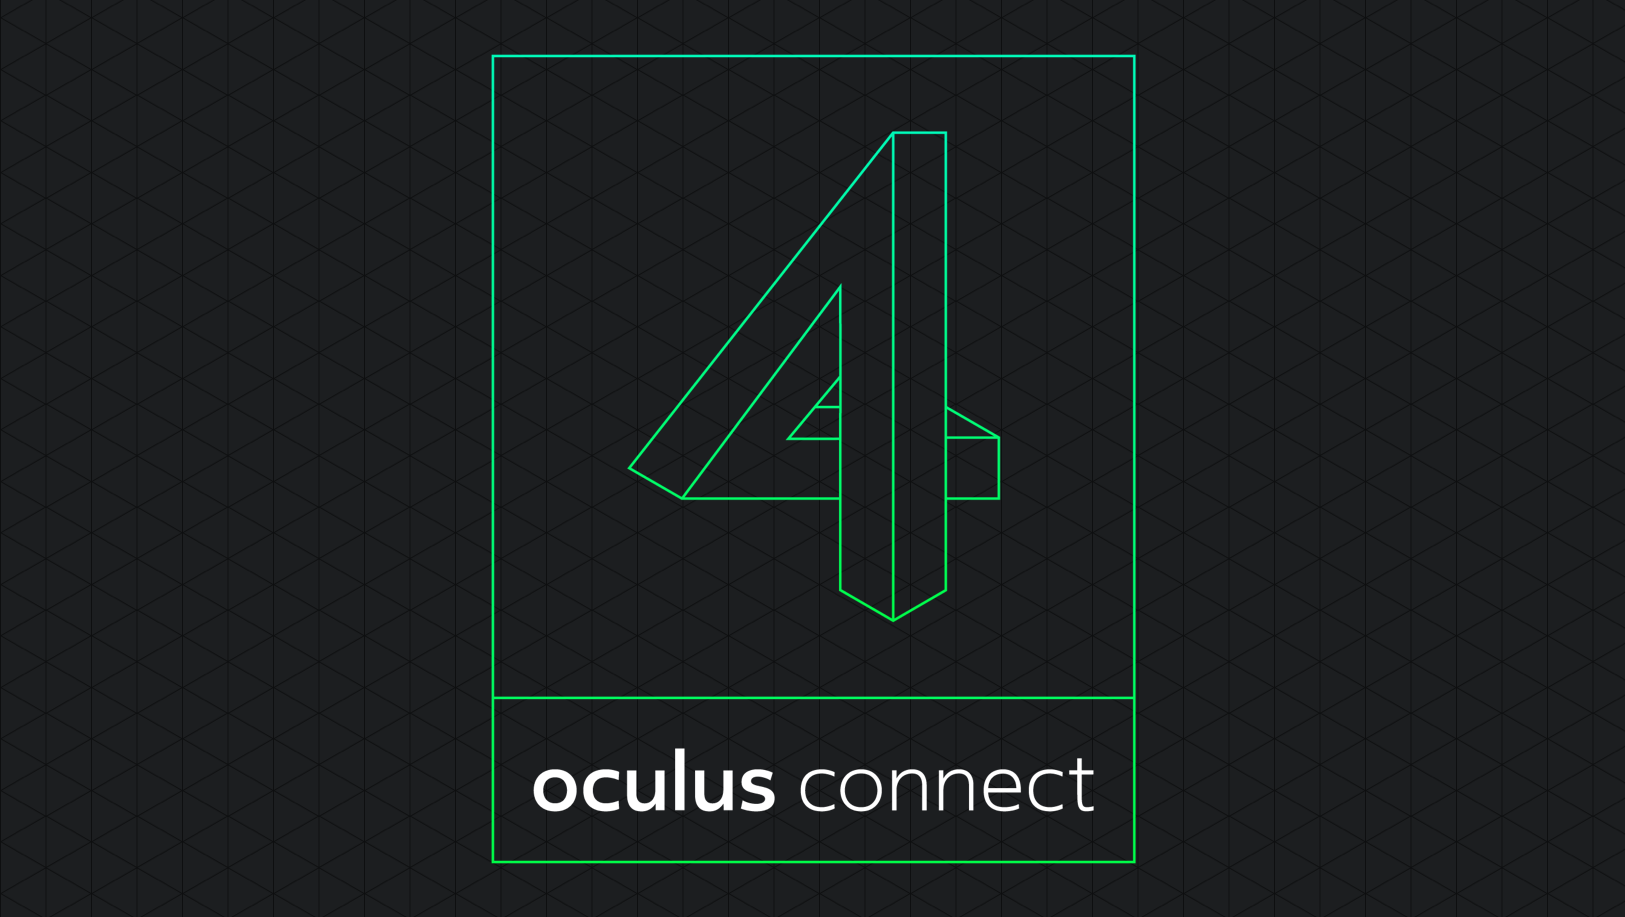 On October 11th and 12th, Oculus held its annual conference called Oculus Connect where it showcased all its latest advancements and announced a lot of news. I was quite hyped by the conference and I hoped that Oculus may surprise us all. I forecasted some standalone devices and AAA games announced, but I really wanted to hear something that could make me blow my mind, as for instance a CV2 or an augmented reality device by Oculus. Actually, I came out pretty deluded. Oculus Connect just announced the things we were all expecting and little more. Disruption can wait and I think that Oculus, since acquisition by Facebook, is more interesting in developing commercial viable solutions than true innovations. That's not necessarily bad, it is a choice that has sense from a business point of view, but the innovator that is in me wants something more! Anyway, let's starting talking about the news, in random order. Zuck wants 1 billion people in VR [caption id="attachment_2715" align="alignnone" width="803"] VR will be the next computing platform and facebook will be in (Image by Upload VR)[/caption] The main keynote was held by Mark Zuckerberg, CEO of Facebook, with the help of Hugo Barra, head of Oculus. Zuck went on the stage and made a bold claim, saying that he wants 1 billion people to enter VR. This is the main goal of Oculus. He didn't say when he wants to obtain this goal, nor how to obtain it. So, it is basically as I walked on a stage and told that my goal is have 1 billion dollars and have more women than Hugh Hefner. Everybody claps the hands and we are all happy, but in the end it has just no sense. I mean, it is a bold claim to be made by facebook right now, when if we sum the sales of GearVR and Rift, we maybe arrive at 8-9 millions devices... so Zuck is at less than 1% of his goal. There's a long road to go and with VR at this moment in the Trough of Disillusionment, I'd stick to more concrete goals of making people understand NOW why VR matters and make them buy VR devices, instead of thinking about having the whole world using VR somehow in some unknown moment in the future. Furthermore, as spottend thanks to NWN, Philip Rosedale, founder of High Fidelity, pointed out that to handle a social VR eperience with 1 billion people, Zuck would need 50 million servers and this is just impossible... https://twitter.com/philiprosedale/status/918198262368157696 ... unless that Facebook adopts a distributed architecture (with someone suggesting even the use of blockchain) https://twitter.com/philiprosedale/status/918268993902743553 Anyway, from this goal is clear one thing: Facebook sees VR (and AR) as the next computing platform: considering that we have 2+ billion smartphone devices in the world, aiming at 1 billion VR devices means that basically he wants VR to become almost widespread as smartphones, so that in the future it can substitute them. Oculus Go [caption id="attachment_2708" align="alignnone" width="754"] Oculus Go design (Image by Oculus)[/caption] This has been for sure the most hyped news of this conference. In its road to reach 1B people, Oculus has announced Oculus Go headset. What is Oculus Go? Well, it's Facebook's new low-tier standalone VR headset. Just to recap some features: It is standalone, so it works on its own, including the processing unit, the screen, etc... It has built-in spatial audio speakers, integrated into the headset. If you have ever used HoloLens, you know what I'm talking about: there are little speakers integrated into the strap, near the position of the ears of the user. This way, the user can have amazing 360 audio without wearing any headphones. Anyway, since this means that everyone can hear what the user is hearing and that's no good (especially if the user is experiencing something personal or intimate), there is the possibility to add personal headphones; [caption id="attachment_2721" align="alignnone" width="801"] This image conveys very good the idea of what integrated audio is (Image by Upload VR)[/caption] Screen is a high-resolution fast-switch LCD and not an OLED. This is a solution similar to the one of Pimax 8K and has been adopted because this helps in reducing the perceived screen door effect (OLED use Samsung's Pentile pixel arrangement and this is no good for SDE). Screen resolution is 2560×1440; According to Road To VR, It uses Oculus’ "next-generation" lenses, "offering a wide field of view with significantly reduced glare."; 3DOF tracking of the headset, that is: NO POSITIONAL TRACKING, NO ROOM SCALE; Control through a 3DOF remote, very similar to the one of Gear VR; [caption id="attachment_2723" align="alignnone" width="826"] Oculus Go remote: it is an evolution of Gear VR controller. Notice how it is ergonomic inside the hand (Image by Oculus)[/caption] Gear VR platform: a game made for Gear VR, works flawlessly on Go: this means that since Day 0, this device will have lots of interesting VR apps; Amazing price of $199. https://youtu.be/-bQUBzPZHHQ Basically, it is a device very similar to a s8 + GearVR, but sold as standalone and for only $199. Road To VR reports that it will be available for users at the beginning of 2018, while developers can ask for a dev kit even now... and they'll receive it the next month. Oculus says on its website that there is limited availability, so maybe they'll send it only to selected developers. No one has been able to try the device (not even a prototype) and even specs are not that clear. Everybody went crazy for this piece of news, but I have not been that hyped. The reasons are: Oculus Go hasn't surprised me, since a Bloomberg report of some months ago already revealed its existence, features and price. If you follow that link, you can read that the device name was previously "Pacific" and that it should be produced in collaboration with Xiaomi: Oculus has plans to enlist China’s Xiaomi and its network of contract manufacturers to produce the new headset for global distribution, people familiar with the arrangement said. The device will feature Oculus branding around the world, except a custom version for China will feature Xiaomi branding and run some Xiaomi software applications, the people said. Hugo Barra, recently put in charge of Oculus’s VR products, was previously a Xiaomi executive. Xiaomi declined to comment. As I've already told you in my post of yesterday, I have doubts about Go's utility. I think that a GearVR-experience is not that amazing in VR. GearVRs are good to watch Netflix, 360 videos, chat with people in VR and make minigames. That is exactly the vision of Facebook... because watching videos, chatting and playing little games are exactly the tasks that we all do on that social media. But VR is much more than a Facebook-like experience! VR is movement, is touching things, is having our full body, is being really inside an adventure and get amazed. I don't like this approach. Furthermore, people may be attracted by the price, but they still don't know why they should spend $200 for a VR headset... the general consumer has no idea about what is the use of VR, so won't buy a VR headset for $200, not even for $100. Cardboards are free everywhere, but people do not use them! [caption id="attachment_2722" align="alignnone" width="762"] All the device, for only $199! (Image by UploadVR)[/caption] IMHO, Oculus Go offers VR enthusiasts that do not own a Samsung phone, the ability to enter VR for only $200. It also offer people that currently use Gear VR in exhibitions, a cheaper and more easy-to-use alternative. That's it.... for these niches it is great, but it is not that appealing for everyone. In fact, according to Upload VR's Ian Hamilton: I also found Oculus CTO John Carmack surrounded by developers pinging him with questions and asked him how big he expects sales to be for Oculus Go. He echoed Mitchell’s assessment, suggesting expectations for the headset to fall between Rift and Gear VR sales. This means that Oculus expects to sell just some million devices. People are talking about disruption of VR market, but Oculus just thinks about selling less Gos than Gear VRs! The road towards the billion users is still very very long... Oculus Santa Cruz [caption id="attachment_2729" align="alignnone" width="813"] A user wearing Santa Cruz and its controllers (Image by Road To VR)[/caption] Everything that Oculus Go lacks is present in another headset presented by Oculus: Oculus Santa Cruz. If you follow my blog since long time, you surely remember this name: it is a device that headset showcased in super-preview at Oculus Connect 3. What is Santa Cruz? It is an Oculus Rift, in standalone form factor. This is not a wireless device, it is a standalone one, exactly as Oculus Go. But it has some big differences with Go, that I will highlight while talking about it. Notice that, apart from official images, we have no pictures: no one has been able to took photos or videos of it, so I can't show you that much. I will make you imagine how it is, as I've imagined it by reading reviews. So, imagine an Oculus Rift, without a companion PC and so without cables. The rear part of the strap is not that solid triangle, but it is more soft, more rubbery, so it is far easier to put it onto your head and it is also far more comfortable. There are no headphones: as with Oculus Go, there are integrated speakers that you can mute using custom headphones. Optics are very good: new Fresnel lenses, OLED display. Screen door effect, mura correction and resolution are higher than the Rift. Road To VR journalist hypothizes that the resolution may be something around 2,560 × 1,440. What scares me is that the same journalist talks about an experience with lower graphics and 75Hz of refresh rate. I mean, we're talking again about a Gear VR-like experience. That's so bad. Of course a standalone headset can't reach the same power of a desktop PC powered by a GTX1080, but I was hoping for something more. Then there are controllers: 6DOF Controllers, very similar to Oculus Touch. Just take a Touch Controller, remove the upper buttons and thumbstick and add a touchpad there to substitute them all; furthermore, rotate 90 degrees the half-moon circle full of IR sensors; and voilà, you have a Santa Cruz controller! Controllers are one of the two features that make Santa Cruz far superior than Go: with Santa Cruz YOU HAVE YOUR HANDS IN VR. Not just a remote, that is useful only to watch movies. You can interact naturally in VR! [caption id="attachment_2728" align="alignnone" width="809"] Oculus Santa Cruz controllers (Image by Road To VR)[/caption] Tracking is made by 4 IR wide-angle cameras, that are put on the 4 corners of the faceplate of the headset. These are used to perform inside-out tracking for controllers and headset. Using 4 cameras, Oculus has been able to obtain a great tracking area for controllers: to make them exit from the tracked area, you have to perform really weird moves. If you do them, you may have the impression of the controller to snap in your view when it gets tracked again... but then everything works again flawlessly. [caption id="attachment_2731" align="alignnone" width="795"] The tracking volume for controllers of Santa Cruz: it is huge! (Image by Road To VR)[/caption] This tracking solution is far better than the one of Windows Mixed Reality because of two reasons: It has a bigger tracking area for controllers: it is easier with MR devices to have your controllers out of the tracking area; It uses IR tracking, so it is more stable to lighthing changes and can work in the dark (even if it can be prone to IR interferences); I think that this was the way of Oculus to say "B*tch please" to Microsoft... and actually they said something similar during the conference... https://twitter.com/hmltn/status/918169566550695937 ... and Alex Kipman of Microsoft hasn't been that happy about that https://twitter.com/akipman/status/918258732634554370 The tracking quality is good, even if Road To VR reports a bit of jitter, both in head tracking and controllers. And the fact that Ars Technica noticed "a flat painting mounted on the ceiling that had a mostly square-grid arrangement of ceiling tiles and skylights", someting useful to help tracking, makes me think that the Santa Cruz tracking still needs some adjustments. In fact it is still a work-in-progress: Oculus engineers have said that a lot of things may change in these months. I'm pretty excited by Santa Cruz: it is a full-fledged VR device, with no cables, no PC, but room scale and ergonomic 6DOF controllers! It is a standalone Rift, wow! Imagine playing a game like Robo Recall (but with less cool graphic, since we're on a mobile device) without cables, without limitations, everywhere you want to experience it! Because you can put the Santa Cruz + controllers in your suitcase and take it with you and play everywhere! And jump, crouch and shoot like in real life! Can't wait for it! https://youtu.be/J0DFstXScTA We don't know anything about price and availability. Price will be higher than Go for sure and the device will be sent to developers next year (we don't know when) and later released to consumers. While you wait for it, my advice is reading some reviews from Road To VR, Upload VR and Ars Technica. Especially Road To VR one, it is very detailed. Oculus Rift CV1 gets permanent price cut Good news for us all: Oculus Rift price will be $399 for now on, so the device will come to the price that it had during the Summer of Rift. This is fantastic and will surely increase adoption of VR headsets. I think that this decision has been taken to fight the upcoming Windows Mixed Reality Headsets. On November, 6th Samsung will officially release its Odyssey headset, that offers much more than the Rift (high resolution, inside-out tracking, etc...) for $499. Rift couldn't have the same price, so Oculus has taken the smart decision of lowering the price to $399 again. This way the Rift offers a little less, for a smaller price. That's perfect. The best thing about this decision is the video they made to advertise the new price of Rift. It is one of the best VR marketing videos I have ever seen. If you have 2 minutes, watch it. https://youtu.be/5q6BcQq_yhw Oculus For Business [caption id="attachment_2718" align="alignnone" width="795"] People collaborating in VR inside an architectural experience. I don't know what those 2 girl are seeing since they don't have a headset, but they're surely decorative (Image by Oculus)[/caption] This has been in my opinion one of the most important news of the OC4, even if a lot of magazines almost ignored it. Do you remember that when comparing Vive to Oculus, I highlighted the fact that Oculus didn't have a business licensing model? Well, finally it has it. So, the Rift is not a consumer-only product anymore and you can use it for enterprise applications without being an outlaw. Oculus has launched Oculus For Business: spending $900 you can obtain an Oculus bundle containing all the hardware for a 360-degrees VR experience, some facial masks and special warranty & support. [caption id="attachment_2717" align="alignnone" width="825"] The contents of the Oculus for Business bundle (Image by Oculus)[/caption] The price may seem high, but it is normal that commercial solutions have higher price. Furthermore, it is still $300 less than buying the Vive Business edition. Oculus now can compete with a low price with Vive even in the enterprise space. I think that Vive tracking solution (with Trackers and such) is more suitable for certain kind of enterprise applications (like arcades), but for the others, Oculus can be great. They for instance showed the collaboration they're making with various big companies like Cisco and Audi. https://youtu.be/dSvSAai75rM New Oculus Home Rift runtime will reach version 2.0 (named Rift Core 2.0) and with it there will come two big news: a completely redesigned Oculus Home and Oculus Dash. New Oculus home is... a-ehm, a CTRL+C, CTRL+V of Steam VR Home Beta. It is your personal place that you can customize and where you can invite your friends to stay together. There will be present artworks, toys and your achievements of games...  I mean, you can read the description of SteamVR Home. It is the same stuff. The only difference is that to launch game you will use old-style gaming cartridges. https://youtu.be/oGid87BYyIw Finally they have updated the current Oculus Home, that was a 2D UX inside a static 3D world into a true VR hub. And since we know that the application has been made with Unreal Engine, we're sure that the graphics will be really awesome. The update will come for free in December 2017. Get ready for a true immersive VR menu. Oculus Dash Oculus Dash is the other big news of the Oculus Runtime. It is a dashboard that you can recall whenever, wherever, whith just a key of you controllers (I bet it will be the Menu button). It will include functionalities of Oculus Home and Universal Menu. https://youtu.be/SvP_RI_S-bw Basically, since Oculus Home has become a 3D world, there is now the need for an easy to use 2D menu and it is Dash. Through Dash, you can set some settings, but especially you can launch every kind of VR experiences. So, for instance, while you're playing Robo Recall, you're getting bored (impossible!) and you want to play Face Your Fears. So you open the Dash and launch Face Your Fears directly from there... easy, isn't it? No more need to close the game, go back to Home, find the menu and launch the new game. Just a fast shot. But the coolest part is that you will be also able to launch Desktop 2D apps: Chrome, Visual Studio, Unity, Firefox... they will open inside a 2D windows that will be overlayed on top of the VR world. And you can open a lot of them together... so basically you have a screen of infinite size in VR! So, you can just use all your PC apps just within VR, without removing the headset! And you can even pin it inside your VR world: this means that while you're modeling within Google Blocks in VR, for instance, you can keep a window with Chrome and Youtube so that you can keep listening to your favourite music. Or you can leave Visual Studio Open to debug your VR app. That's astonishing. This means hard times for apps like Virtual Desktop and V Dashboard. Especially V Dashboard, that will lose almost all its utility :( . Oculus Dash + Oculus Home are a great duo for the Oculus user experience. Oculus Spaces updates Facebook Spaces, the Oculus social VR platform, is getting some interesting updates: Users will be able to live Facebook Live 360 videos together in streaming. This will be great to live together experiences, like a concert in VR; Kits: a system that will let "anyone assemble items into games or activities that they can save in their space and share with friends". So, creation of mini-games inside Spaces; Quillustrations: Spaces will be integrated with Quill and people will be able to experience together 3d paintings and artistic experiences made with Quill;[embed]https://youtu.be/ZX850QIaJ94[/embed] Upcoming collaborative projects with developers; Together with these updates will come also 3D Posts, the ability to share on Facebook, with every people having facebook (so not only VR users), elements created in VR. The first application to support 3D posting will be Medium, but more are to come. So, Medium artists will be able to easility share their 3D masterpieces on Facebook with everyone! Wow. No one of these updates is particularly disruptive, but they show that Facebook is still working to improve a lot its VR social space. The real disruption is in the last revelation: Spaces will come to other platforms, that is SteamVR and PSVR. We still don't know when it will happen, but it will happen. Of course Facebook has the interest to include the most number of users possible: as they take smartphone users from iOS, Android and Windows Phone, they have no interest in getting only Oculus users inside social VR. If the next-gen Facebook wants to be pervasive as the current one, they have to target ALL users. Oculus Venues [caption id="attachment_2716" align="alignnone" width="822"] Screenshot of the video showcasing a lot of people attending a concert in virtual reality (Image by Road To VR)[/caption] Oculus is interested in offering a platform to let us watch events together, that's why it is launching Oculus Venue. According to Road To VR, Mark Zuckerberg described Venues this way: Venues lets you watch live concerts and live sports, and premieres of movies and TV shows all around the world with your friends and with thousands of other people at the same time. It’s another example of how VR is going to bring us closer together in ways that might not be possible in the physical world. Furthermore they stated that the system should allow for 1000 people simultaneously viewing the same event and nothing more. Further details will be shared in the next months. I want to highlight one sentence of the above quote: "how VR is going to bring us closer together in ways that might not be possible in the physical world". Zuck has spent much time of the keynote explaining how it is not true that VR is isolating. Since VR allows us to do together things that are impossible in the physical world, as: meeting with people that are far away from us; live together fantastic adventures like playing with frisbees at zero gravity; it is social empowering and not isolating. His one is a very interesting point of view and having enjoyed social VR by myself, I partly agree with him. It is still true that while VR connects us with other VR users, it mostly disconnect us from non-VR users. New Oculus Avatars Current Oculus Avatars are pretty simple: you just have some possible customization choices and nothing more. For instance it is weird being of a monochromatic color. [caption id="attachment_645" align="alignnone" width="770"] My VR Avatar... actually, I'm not that blue in the real world...[/caption] That's why Oculus wants to make avatars more personal, more similar to us: it will be possible to customize better the avatar, so that now you can better show who you are. These customizations will include having the proper color of hair and face, but also clothing and accessories. Look at the avatars below to get an idea: [caption id="attachment_2733" align="alignnone" width="790"] New Avatars... look how they're better and more colourful than current ones (Image by Oculus)[/caption] Furthermore, Avatars will get automated eye movements and lip sync! This means that the avatars will automatically follow what we're looking and will change the shape of the mouth according to what we're saying! Awesome! That's cool, but I think that the true revolution lies in the fact that Oculus is making Avatars SDK cross platform! This means that you can use Oculus Avatars in SteamVR and Daydream! This is important because lets everyone of us keep its virtual identity coherent among all the VR experiences. This is very powerful. We need to have a VR identity and Oculus is trying to give it to us. All this epic update will roll out in 2018. The eye movements and lip sync updates will come "later next year"... and this makes me think that later next year there will be an Oculus device able to track the eyes... so, is this the time scheduled for the CV2 release? And does this mean that the CV2 will include eye tracking? We'll see! Anti-harassment tools [caption id="attachment_2734" align="alignnone" width="809"] Oculus bets on users' online safety (Image by Oculus)[/caption] Harassment is a big issue in social VR ecosystems. That's why Oculus wants to address it, offering social VR experiences developers a set of easy tools to let social VR users to report and block annoying people. The nice feature is that the block feature will work at a platform level. So, if I block a user in Echo Arena, that person won't be able to harass me in Rec Room, too, for instance. This functionality will be free for every developer using the Rooms API and will let social experiences developers to have a very useful functionality ready out of the box. As reported by Gizmodo: “Let’s be honest, being in VR with other people, especially strangers, can be intimidating,” Womack said on stage on Wednesday. “For communities to thrive, people need to feel safe—and it costs developers a lot of money and time and effort to build and maintain safe places. We care deeply about protecting the future of social VR. So we want to help. We decided to build an API that does a lot of that for you. Early next year, you’ll be able to get platform-level safety tools, like blocking and reporting, for free. It’s like, built-in best practices that carry app-to-app.” Oculus Explore [caption id="attachment_2735" align="alignnone" width="804"] Oculus Explore menu inside Gear VR (Image by Oculus)[/caption] VR apps are becoming more and more and discovering the ones that we may like is becoming always more difficult. That's why Oculus has created Explore, a place inside Gear VR's Oculus Home where the system suggests to the user news about the app that he/she may like, according to his/her tastes. It is officially defined as "a personalized feed of recommended apps and experiences available to people in Home on Gear VR". That's really a nice idea. Oculus is now launching the Explore API: developers of Gear VR apps can this way push apps, stories, news, notifications and whatever they like about their products to the Explore feed. This way, the users can read all these news and so decide for instance to download a new app because they liked a blog post about it, or to update an app because there is a new cool update launching new features. Explore is coming to Rift in 2018. Other Platform tools Oculus has also launched various other tools, like: Multiview, the Single Pass Stereo Rendering for OpenGL ES that will increase performances for Gear VR apps; Cubemap and Cylindrical layers for PC SDK: I found this news on reddit and it seems to point at new ASW-like features to improve performances on PC; Lost Frame Capture, a tool to debug the performances of your VR application and understand when it misses frames Easy streaming / screenshots sharing from Gear VR to Facebook; Notifications inside the Oculus App when your VR friends enter VR through a Gear VR headset, so that you can connect with them; Improvement to the Mixed Reality Capture Tool. https://youtu.be/YDzLFAF07-U If you want to read a better description of all of this, my advice is going directly to the dedicated page on Oculus Blog. Respawn war game Oculus is partnering with game studio Respawn to create a new war shooter game. The trailer says it all https://youtu.be/jxUwQum4ngo ... or at least says all that we are allowed to know at the moment. As Peter Hirschmann says, "we’re making a super secret game with Oculus." so we can't know that much. The choice of Oculus of funding a war game has raised a lot of critics https://twitter.com/hmltn/status/918373607494918144 IMHO the critics have no sense. I agree with people saying that VR shouldn't be only action games... I'm one of them. VR has to demonstrate that is much more than a gaming peripheral if it wants to reach 1 Billion people. It has to be useful in our everyday life. But if we talk about gaming... shooters and violent games have always been present in the history of gaming. We all love them. This does not mean that we love war, we all hate war, it is something terrible invented by mankind. But playing the war on a PC can be entertaining, so why shouldn't Oculus fund this kind of games? Has it to fund only games that SJWs find acceptable? Everyone here is praising Onward, a war game, as one of the best games for VR... and now the same people are criticizing Oculus for having funded a similar experience... Pixar's  Coco VR Among the socially accepted experiences, there will surely be Coco VR. This is the first experience born from the collaboration of Oculus (hence Facebook) with Pixar (hence Disney). It has been described as the "next level social virtual reality experience" (source: Road To VR) https://youtu.be/688XEeK80GQ We don't know that much about it, apart the fact that: It will be related to the upcoming Coco movie by Pixar; It will include social features: probably we'll be able to visit Coco's world inside virtual reality with our friends, thanks to Facebook's social VR features; The app will launch on Rift on November, 15th and on Gear VR on November, 22nd Echo Combat Echo Arena has been one of the most amazing experiences for Oculus Rift. Someone even defined it the killer app for VR. I think that this is a bit an exaggeration, but for sure it is a fantastic game. Well, it seems that Echo Arena's developers at Ready At Down are ready to release an expansion for this awesome game: Echo combat. Not that much has been reveiled, apart the fact that it will be an amazing zero-gravity shooter experience and that it will be available in 2018. https://youtu.be/EHINAt7-CTg I really enjoyed Echo Arena and one of the parts that I loved the most was going towards opponents and punching them in the face (I know, I'm really violent!). So I can only imagine how could be cool a game with guns and melée weapons in zero gravity... can't wait for it! Oculus has open sourced DK2 [caption id="attachment_2724" align="alignnone" width="802"] Oculus DK2 headset, exploded (Image by Oculus)[/caption] With a blog post in the day preceding the Oculus Connect (and surely in preparation to it), Oculus has announced that it has completely opensourced all hardware and software of the Oculus DK2 device. License will be Creative Commons for hardware design and BSD for firware. I really advice you to read the post: you can really learn interesting things from it. For instance I was surprised in discovering that one of the most difficult things for Oculus engineers has been the production of the headset cable. I always thought that the Cable was just a random cable, bought for $5 on the local shop. Instead it has been one of the most complicated things of the whole project. Then they also explain that due to the short available time and the desired low price for the headset, they used a lot of already-available pieces, like the screen of the Galaxy Note 3. [caption id="attachment_2725" align="alignnone" width="804"] Internal board of the DK2 headset (Image by Oculus)[/caption] I really loved this choice, since from these documents it is possible to learn a lot on how a VR headset has to be made. If you're a maker, I'm sure you'll love them. Oculus did it completely voluntarily, to devolve something to communities and this is a good decision by them, it reminds me the old little Oculus company. There is only a problem: We wanted to caveat that some of the components of DK2 are challenging or impossible to source today, so it may not be possible for an individual to build a full headset from the provided files. We hope that parts of this release are useful though as learnings if nothing else! Damn... so it will not be possible to create a DK2 from scratch! Oculus research is full throttle on AR [caption id="attachment_2726" align="alignnone" width="799"] Oculus Research center machine (Image by Oculus)[/caption] On Oculus blogs has appeared a long post by Michael Abrash about Oculus Research center. The article is a long presentation of people working there, highlighting their talent and passion. What I found really interesting is that Abrash talks about the serious focus of Facebook towards AR: [...] our AR program is the direct result of Mark’s vision—it started because Mark felt it was a long-term investment we needed to make. [...] I’ll be honest—when Mark first raised the topic of AR, I literally said that I wasn’t sure what it was useful for. That earned me a look of disbelief that was useful incentive to think a lot harder about AR’s potential. Three years later, I’m fully convinced that we’ll all be wearing AR glasses one of these years—myself included—but it was Mark’s vision that first got me thinking in that direction, and that convinced me to sign up to make AR happen. While AR glasses have the potential to be one of the most important technologies of the twenty-first century, that won’t happen unless some very challenging practical constraints are overcome. So, if we had any doubts about Facebook being interested in AR or not, you can completely wipe them. Facebook CEO in person is a great AR believer. Get ready for Facebook's future AR glasses. At the end of the post, Abrash invites every passionate techie to join him... so, if you want to work at Oculus Research, go at the end of the post and follow the link... Oculus investments in education, diversity and beyond I really don't know how to summarize this news. I think that the best way is that you take directly a look to related post on Oculus blog. There, you will find that Oculus strongly believes that the Rift can be an educational tool for everyone and for this reason, has made available Oculus Rift stations across 90 libraries in California. Furthermore, it has created the Oculus Education program, aimed at sponsoring research at several institutions to explore how VR enhances learning. https://youtu.be/PVPeuW9DgcA But VR doesn't only serve for education, but also for diversity. Various programs, like the 360 Filmmakers challenge or the Creators Lab are useful to help content creators in shooting 360 videos that can inspire social change. https://youtu.be/CY4jA3HbsI4 And then there is Oculus Launch Pad, that supports VR content creators from different backgrounds, to foster diversity and inclusion in the VR ecosystem (something that will make #WomenInVR happy) https://youtu.be/j8KiD7oXEdM So, even if Oculus is considered by many as the bad guy of VR, it has also its bright side :) Palmer Luckey Surprisingly, the true Palmer Luckey was spotted at the Oculus Connect conference. This time he didn't wear a bra (as much as it could be seen), but the classical Hawaian shirt. https://twitter.com/hmltn/status/918557135729860609 When people noticed it, they started surrounding him to talk about AR and VR. Upload VR journalist Ian Hamilton managed to film 20-30 minutes of this interesting chatting. Palmer seemed very relaxed and it seems that people was just talking with a friend. There have been also funny moments, like when he mocked a girl working on "Microsoft Mixed Reality headset", or when he said this epic sentence: People who say that AR is going to killer VR completely miss the point and should be fired Here are the videos if you want to see them. They don't contain anything disruptive, just an interesting talk about technology. https://www.youtube.com/watch?v=Av0FrNmb3fQ https://www.youtube.com/watch?v=2EfOJOahTOQ&feature=youtu.be John Carmack The Keynote of day 2 was held by John Carmack, that as always made a long technical speech. If you love technical stuff, you can watch it here https://www.youtube.com/watch?v=vlYL16-NaOw And that's it. I hope to have included all the news from the event and the Oculus Blog and hope that this has been useful for you. If you want to watch the event again, you can find the Day 1 here and the Day 2 here. And since it took me a shitload of time to write this article, if you liked it, please gift me a smile by sharing it on your social media channels and subscribing to my newsletter using the form here on the right!